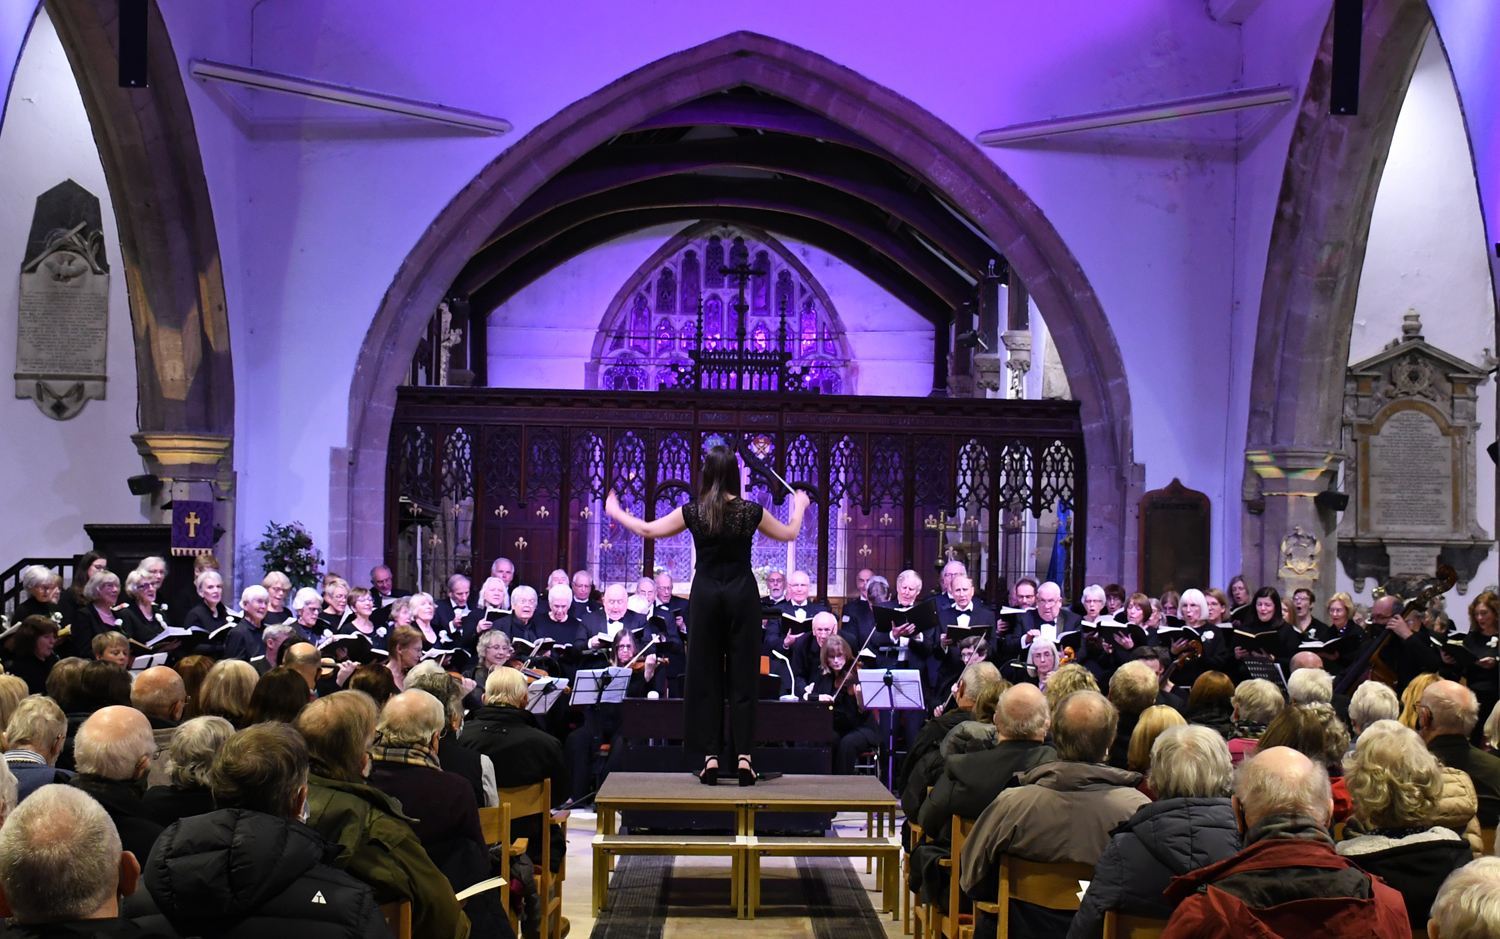 Photos from our recent Messiah concert